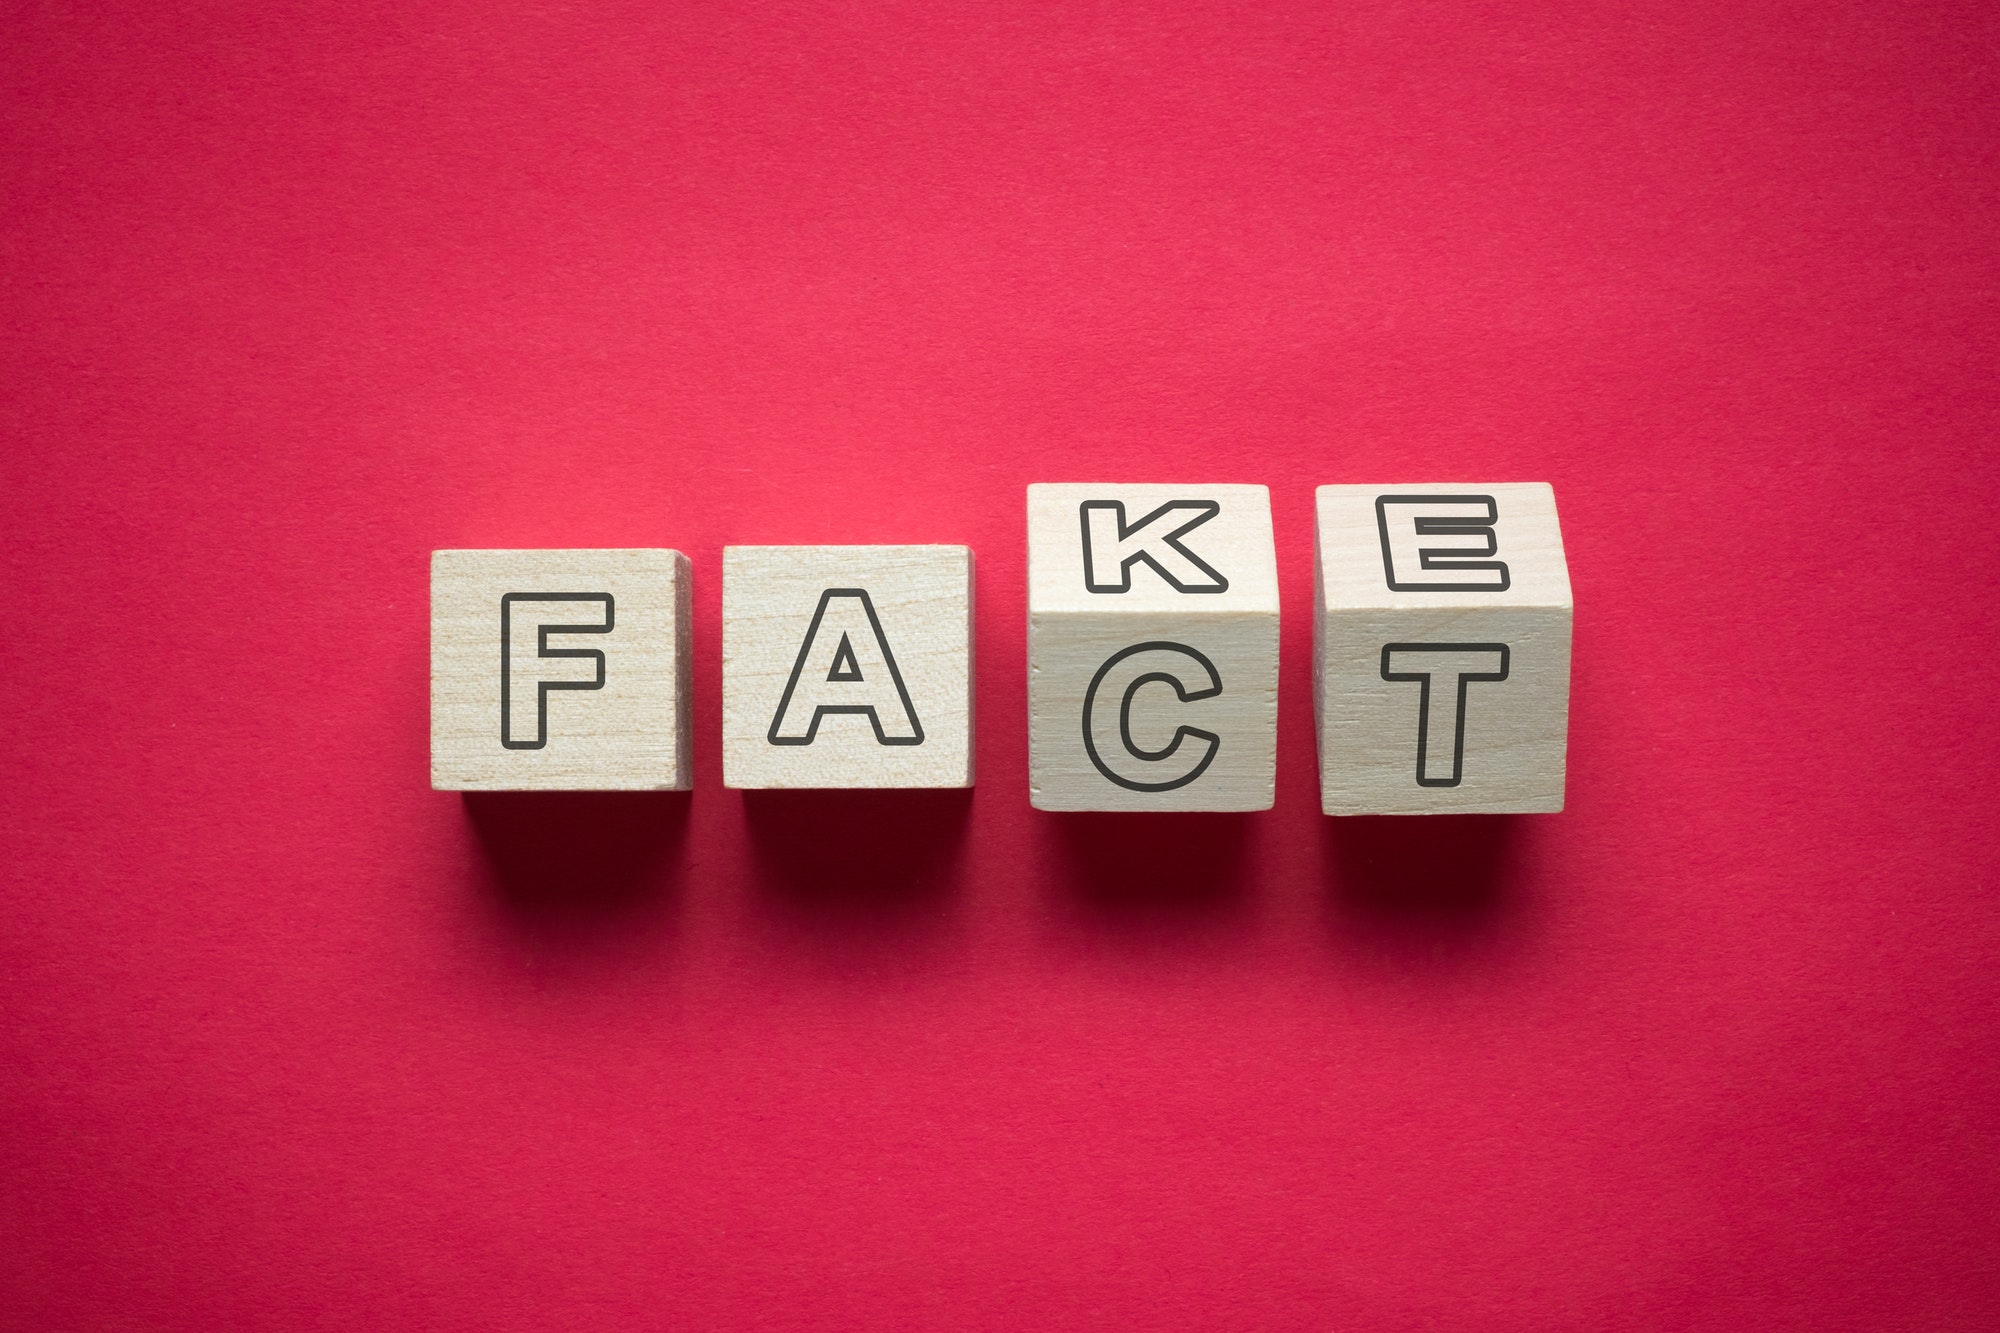 Know the difference between fact and fiction. Don't get bogged down in tech-talk.